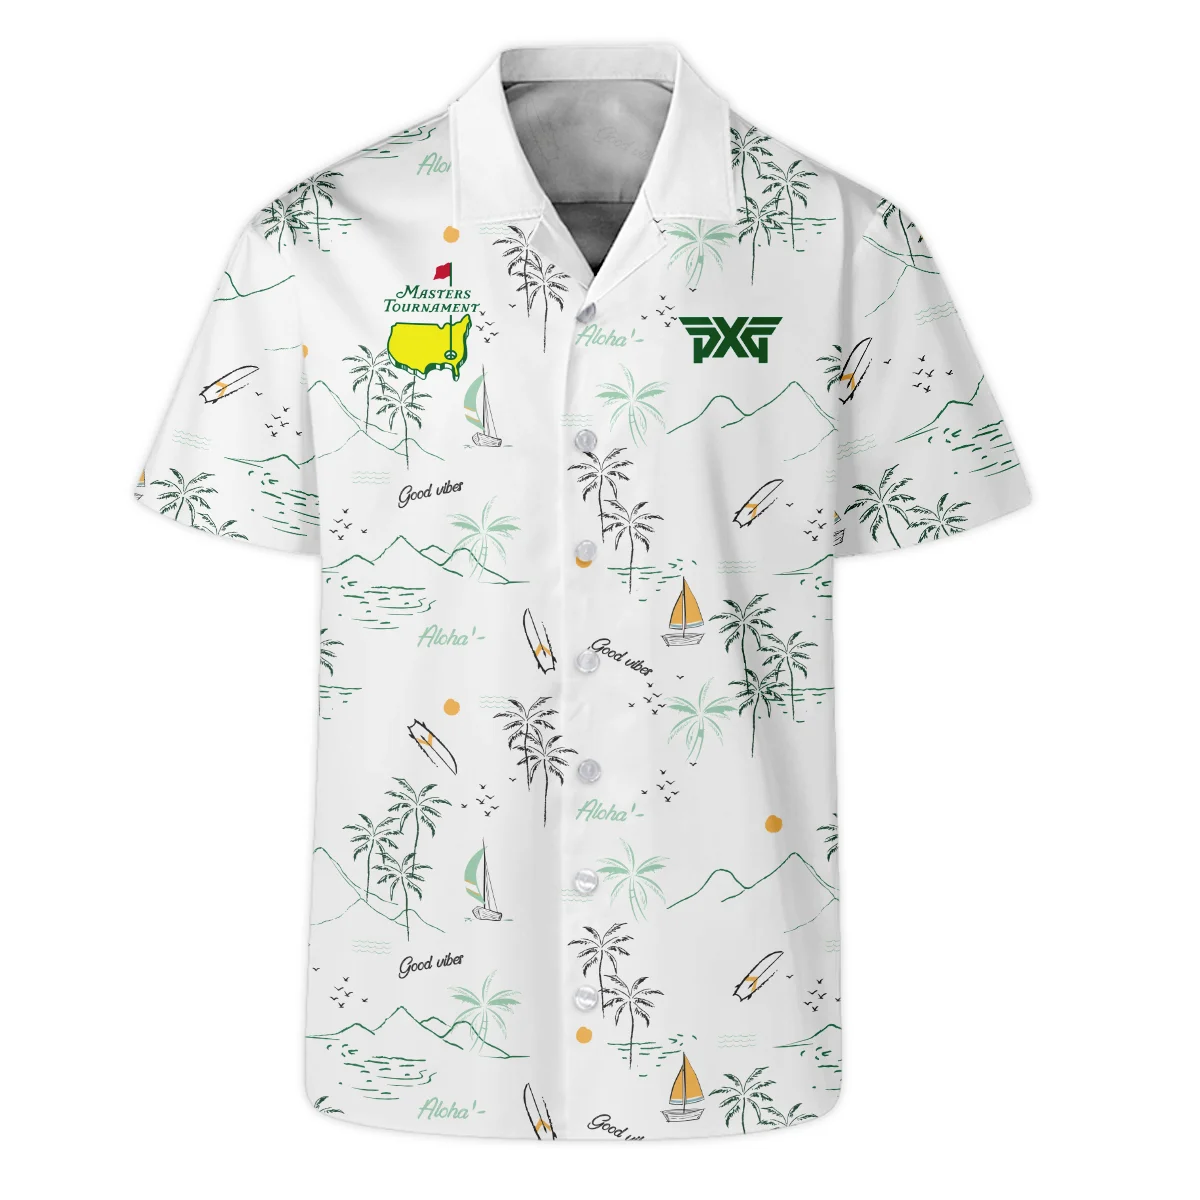 Island Seamless Pattern Golf Masters Tournament Polo Shirt Style Classic Polo Shirt For Men